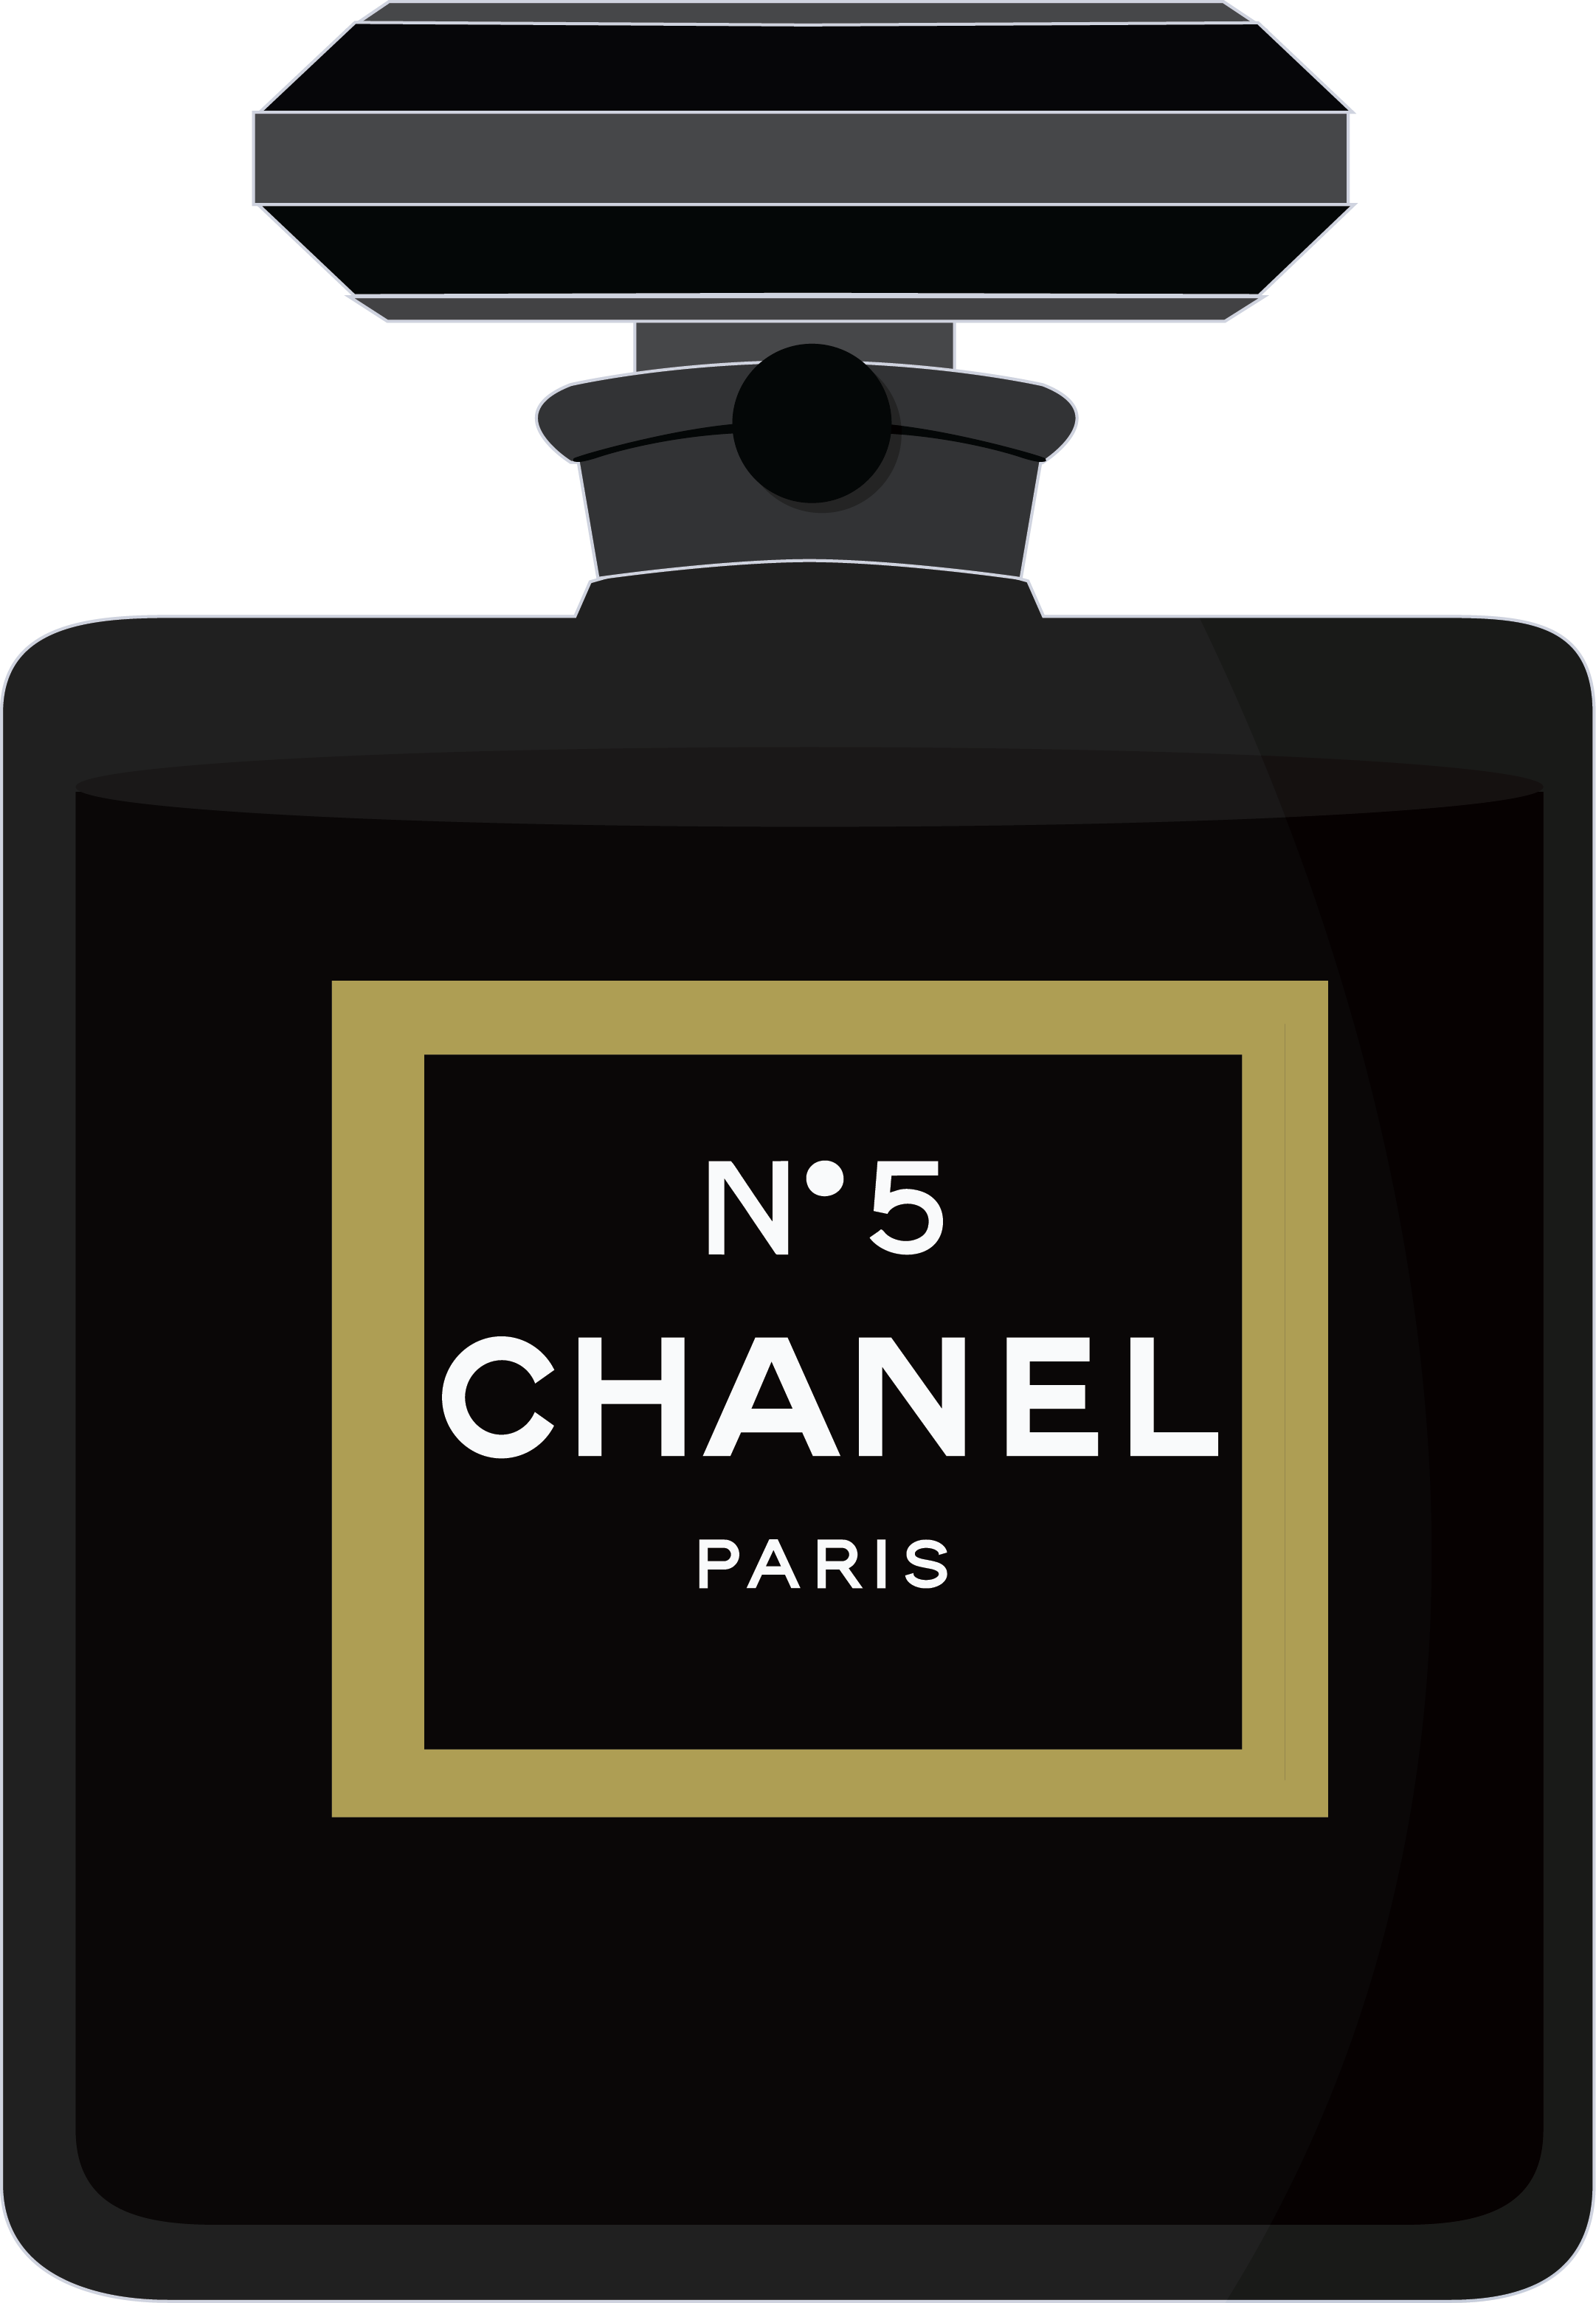 Chanel Perfume SVG & PNG Download - Free SVG Download